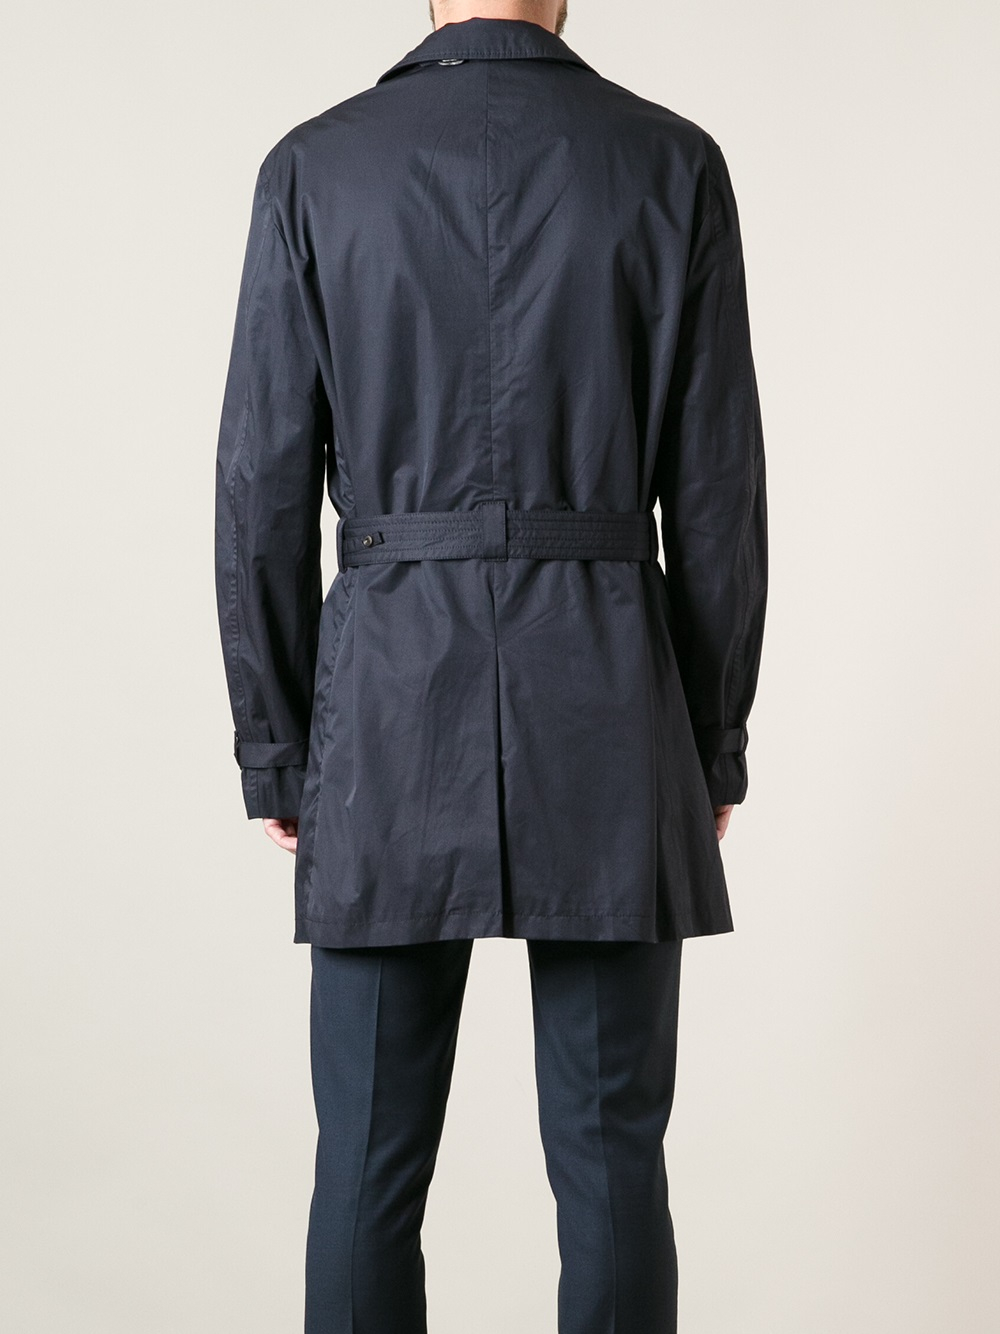 Emporio Armani Belted Trench Coat in Blue for Men - Lyst